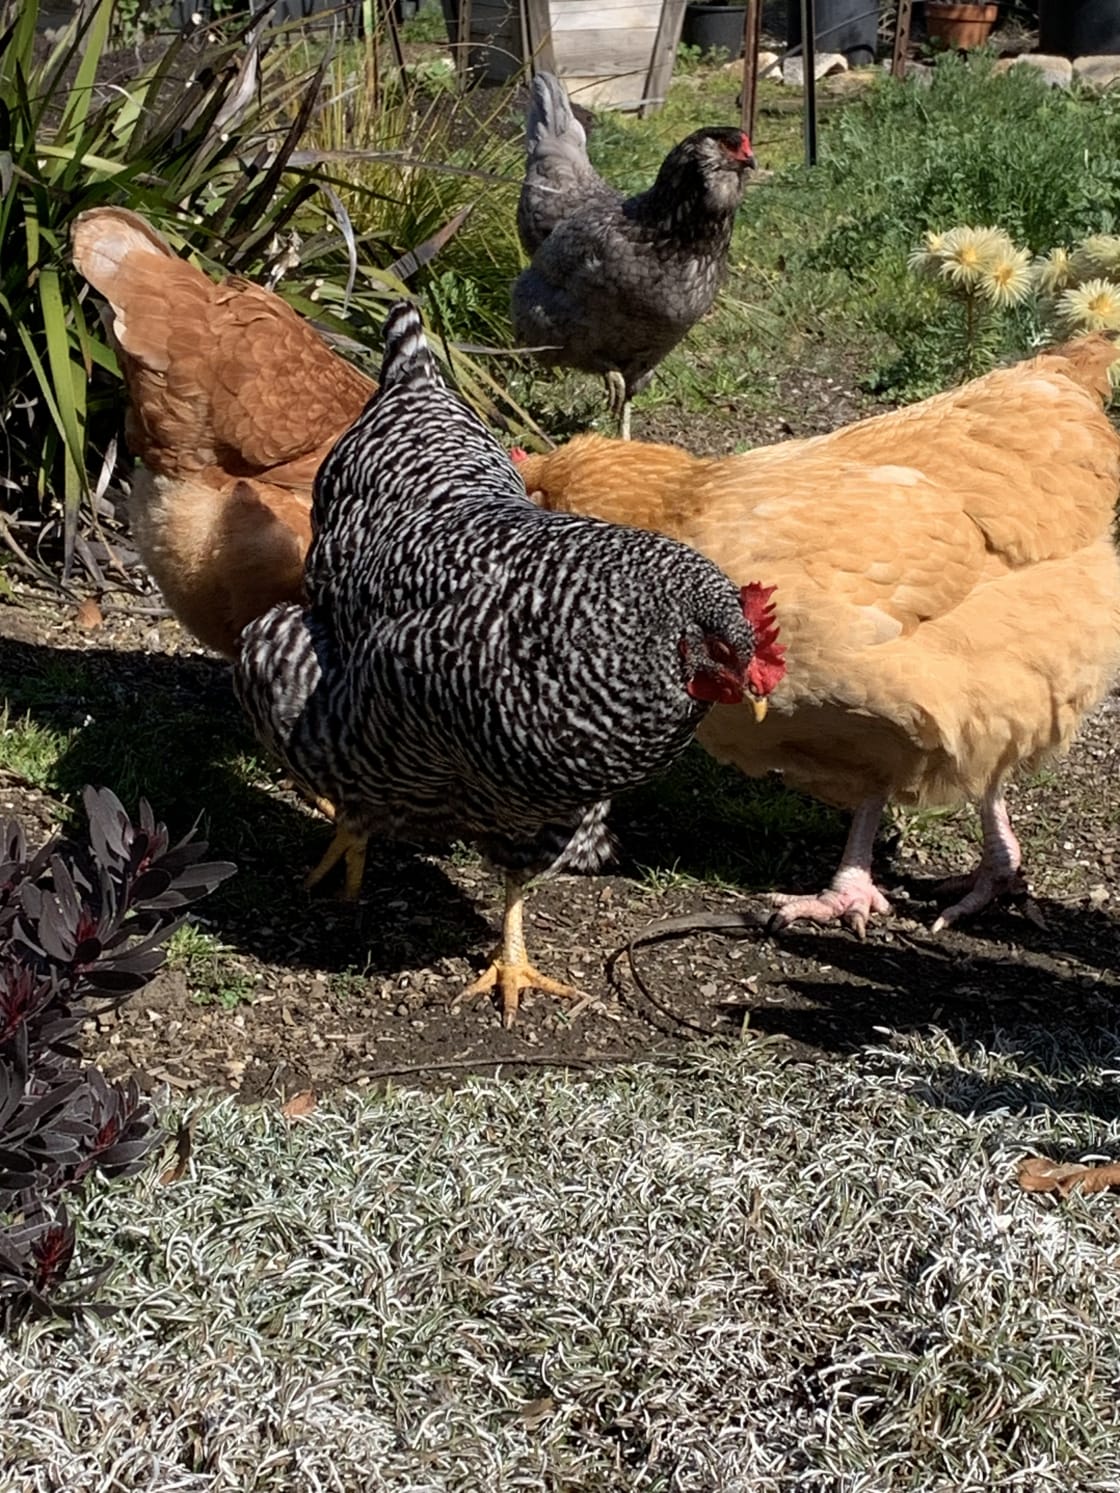 Yes indeed, we have chickens and hopefully eggs!